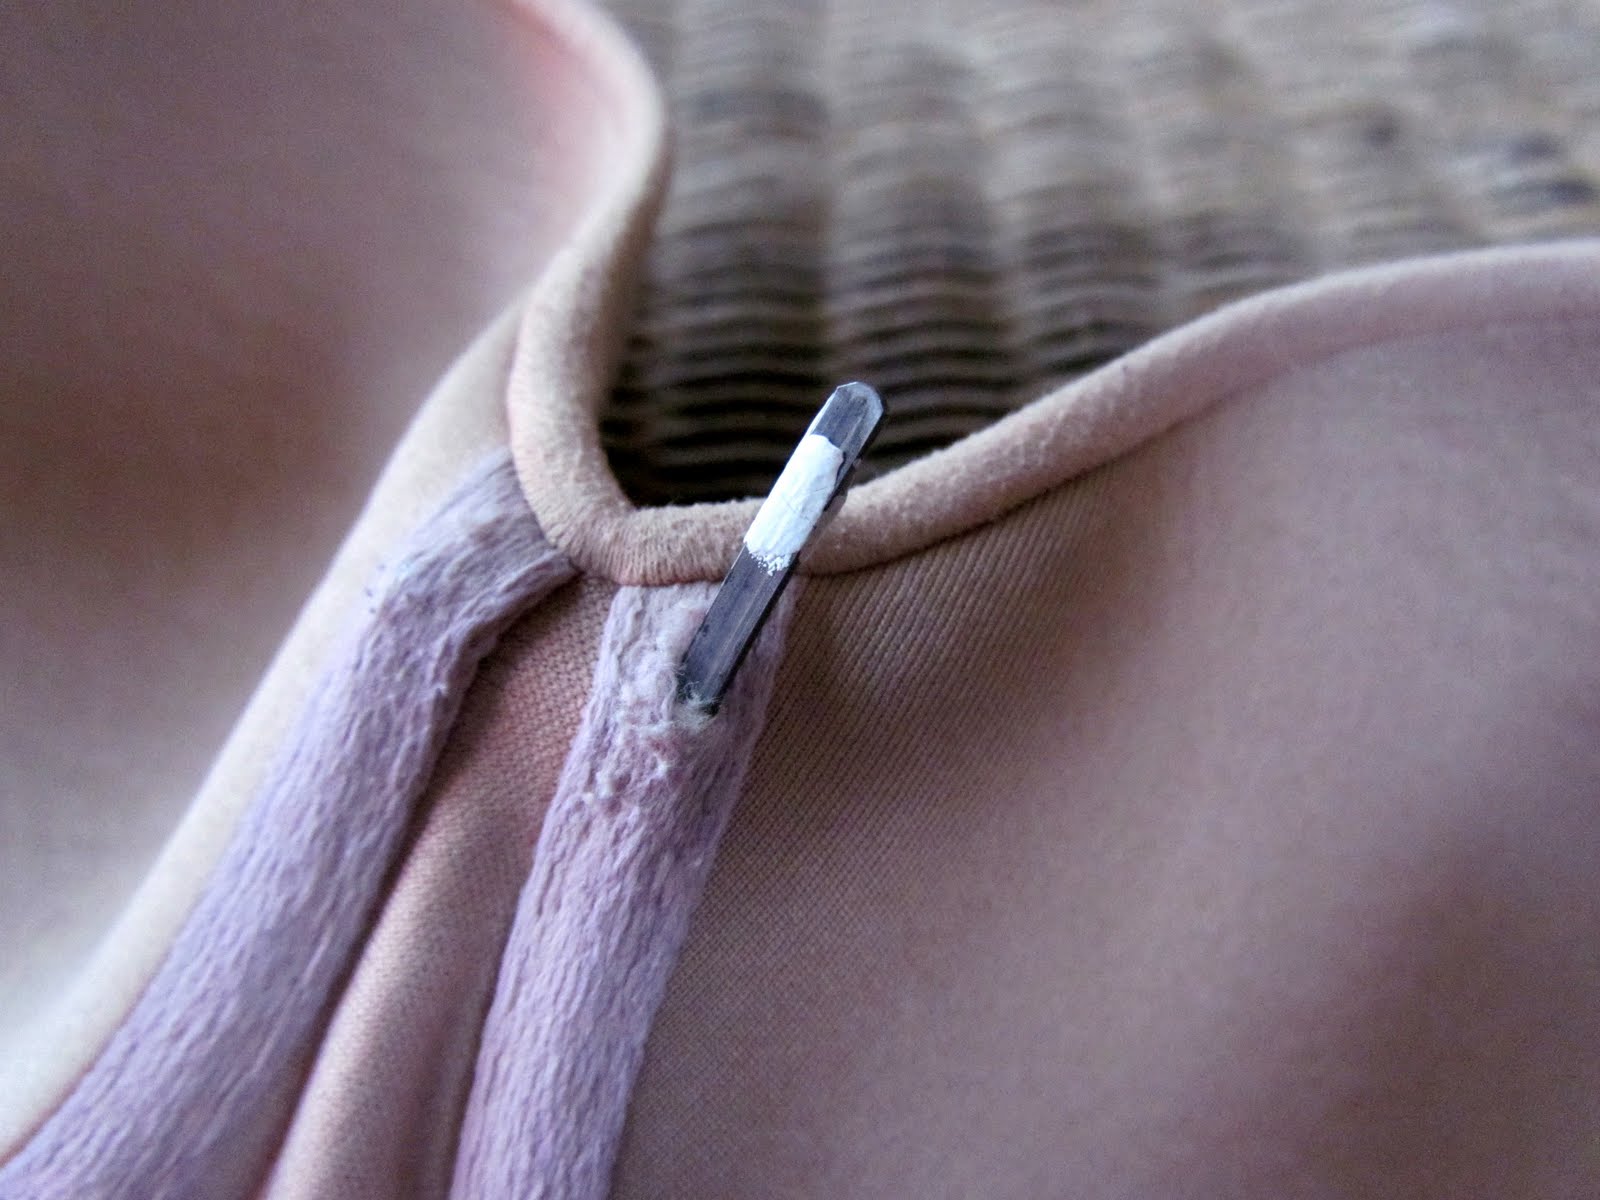 How To Stop Underwire From Coming Out Of Bra